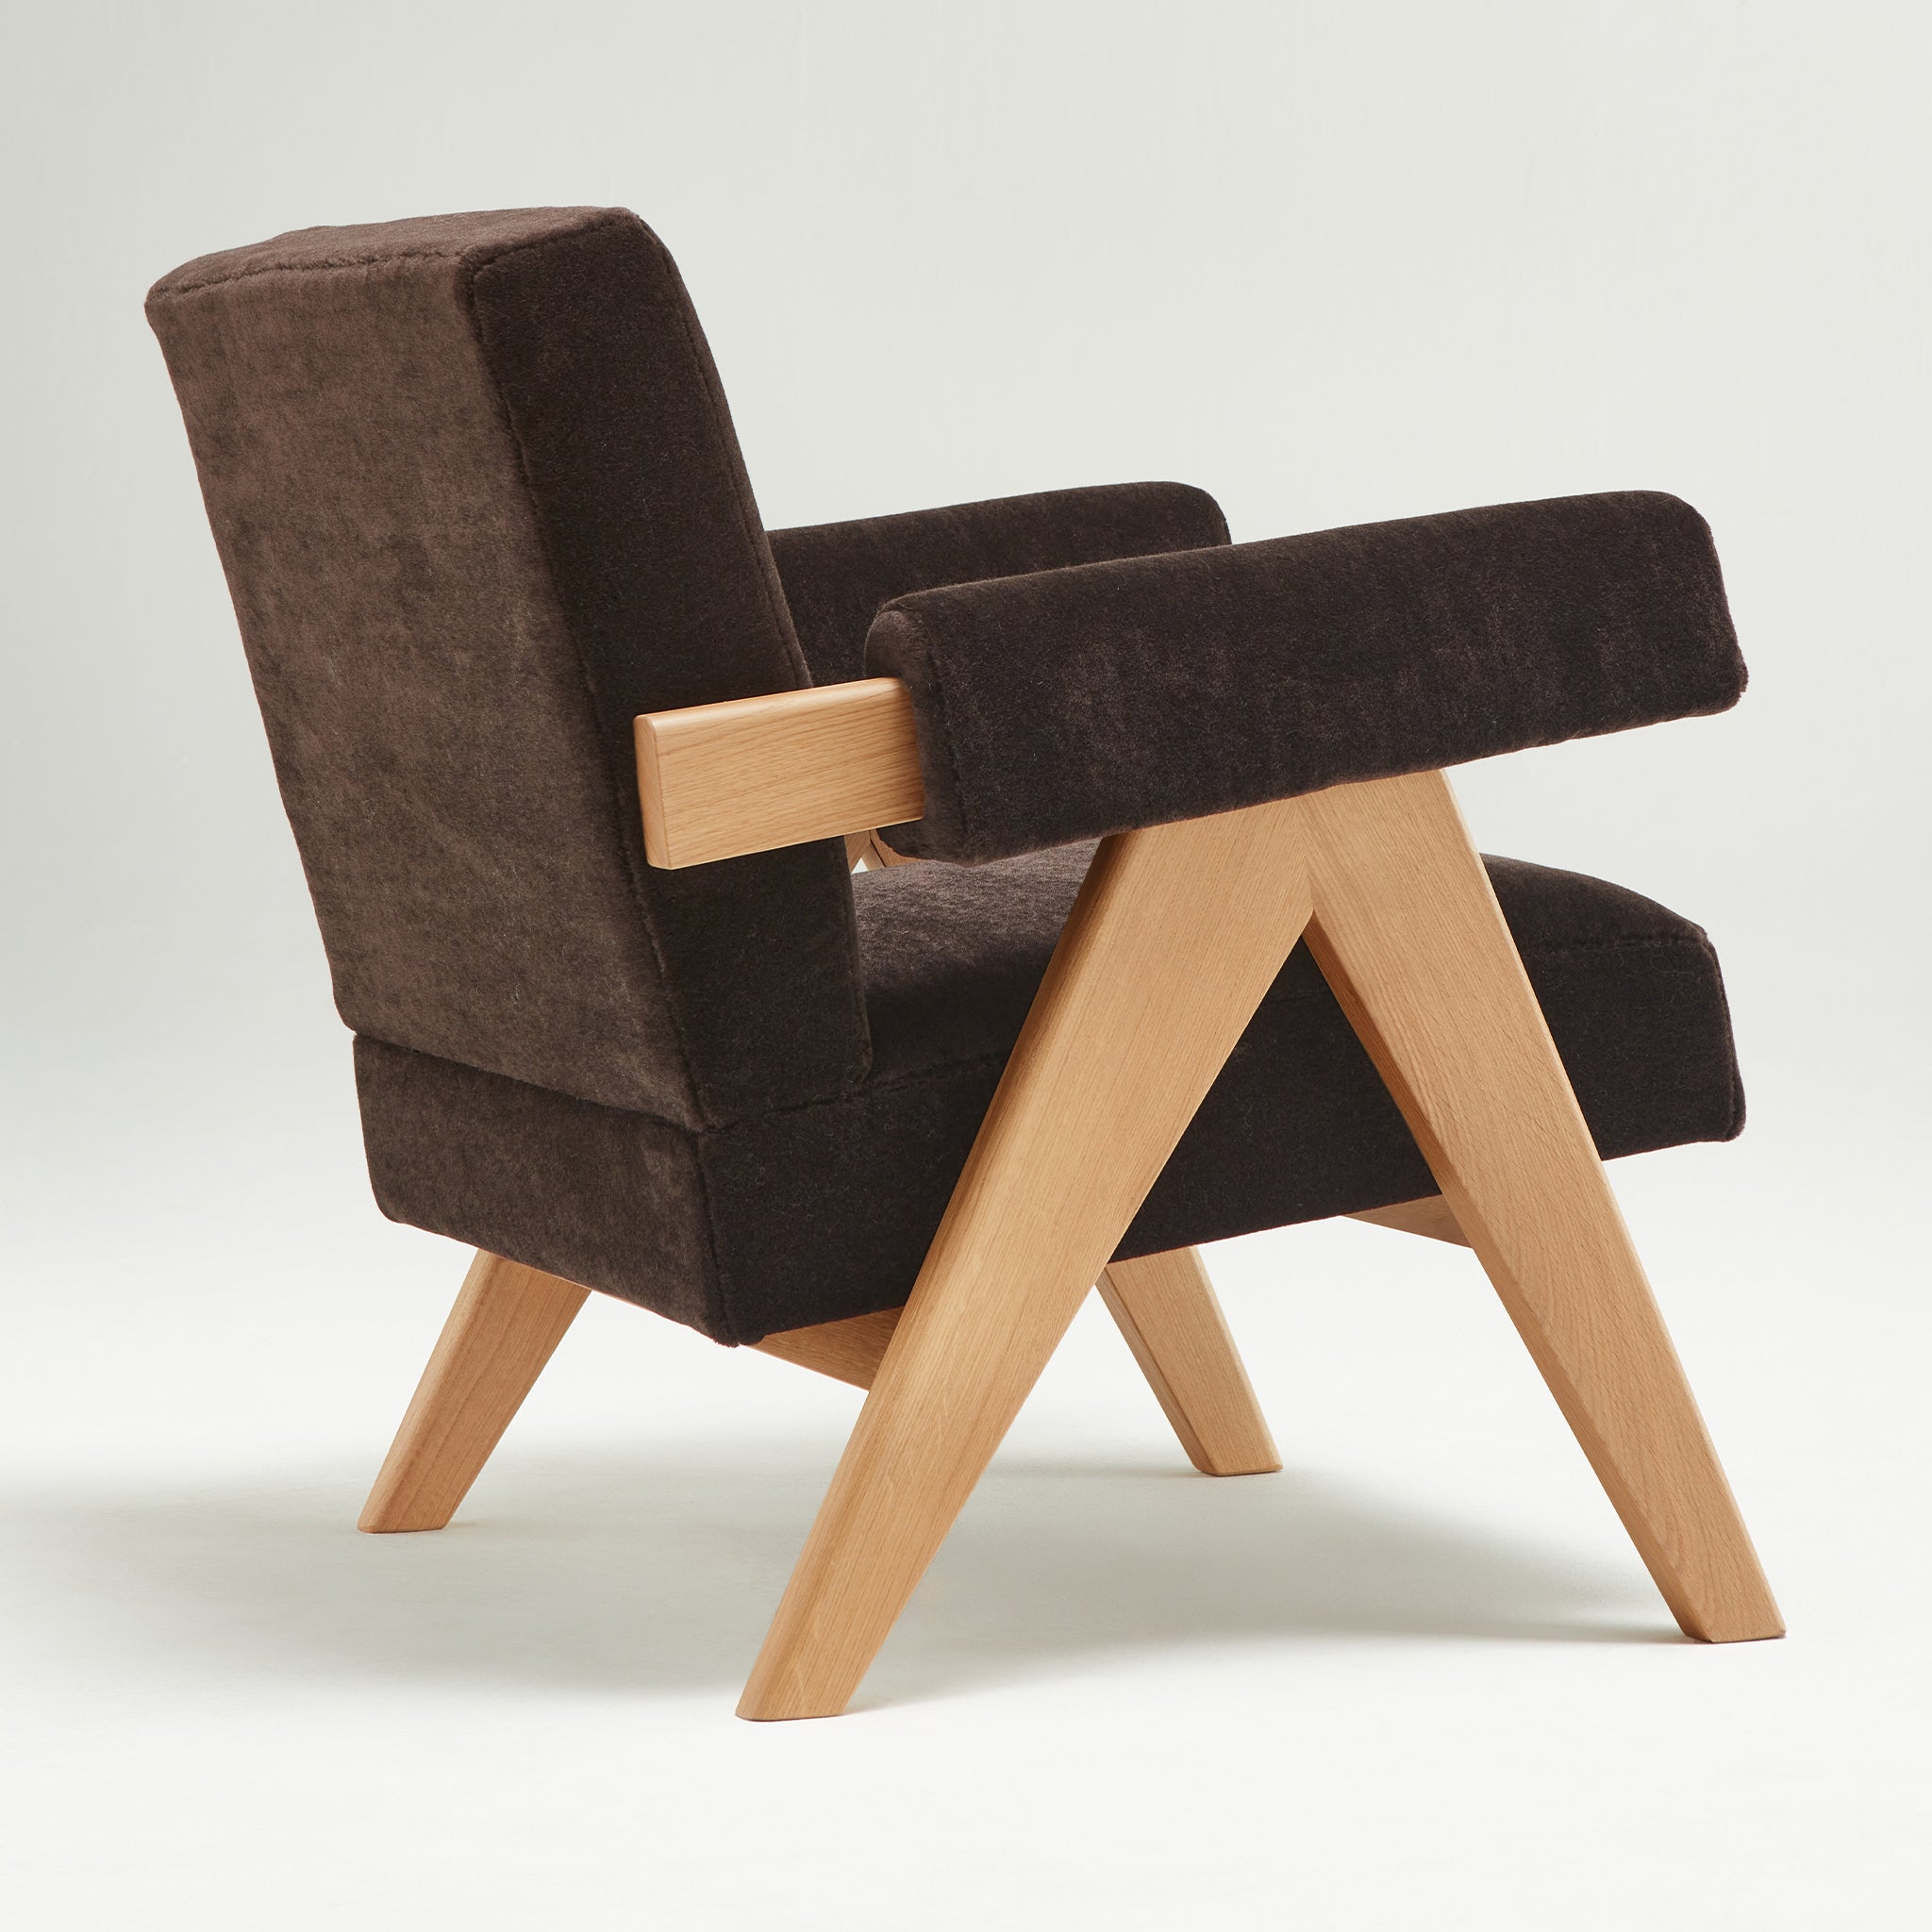 Back view of an authentic chandigarh lounge chair, pierre jeanneret era, natural oak frame, pierre frey choco teddy mohair upholstery, by Klarel #K35-31